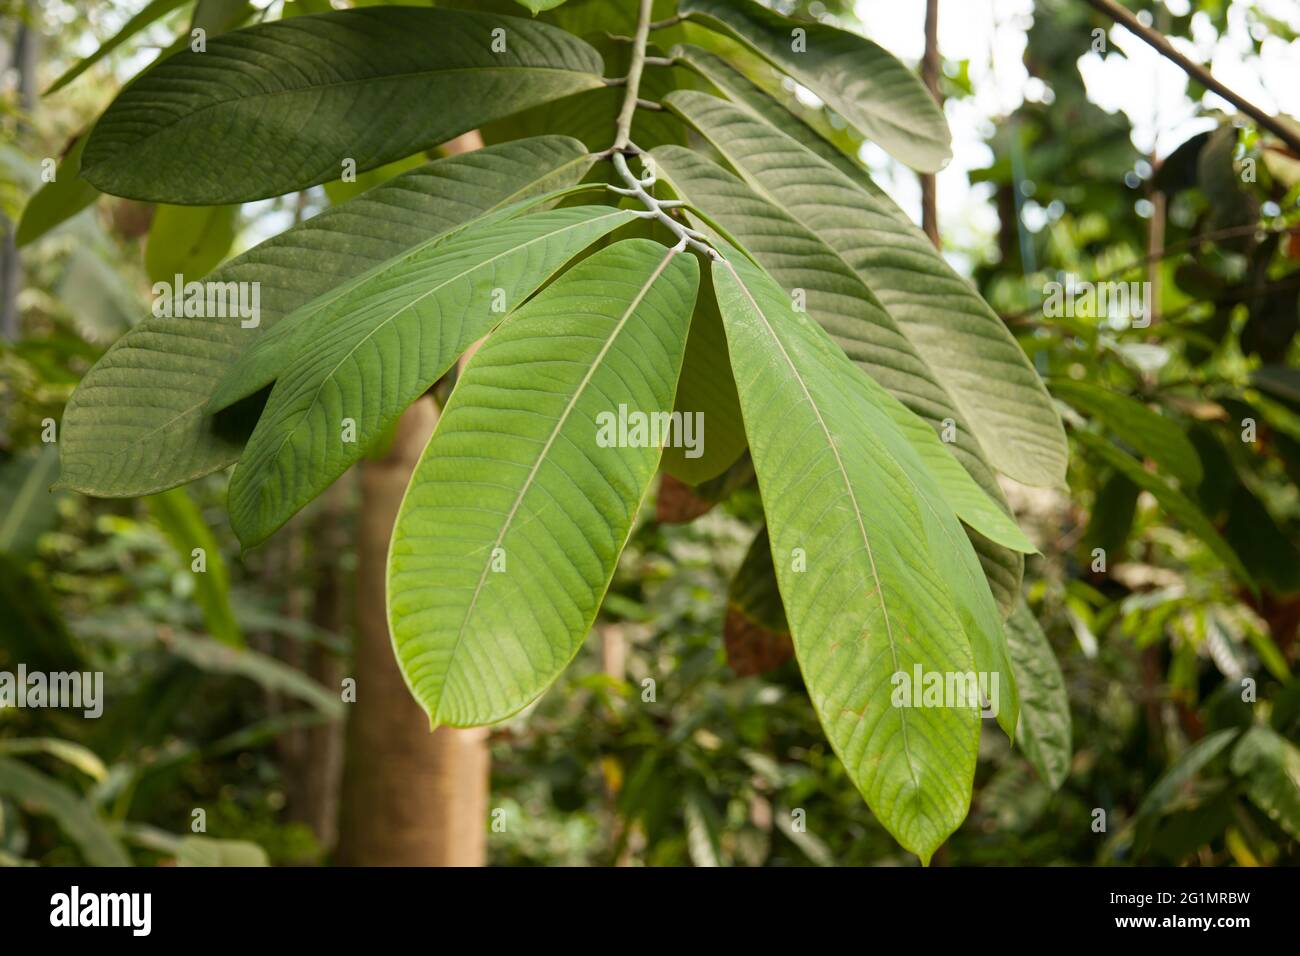 Black Plum 'Vitex doniana' leaves at The Eden Project Rainforest Biome Cornwall UK, May 2021 Stock Photo